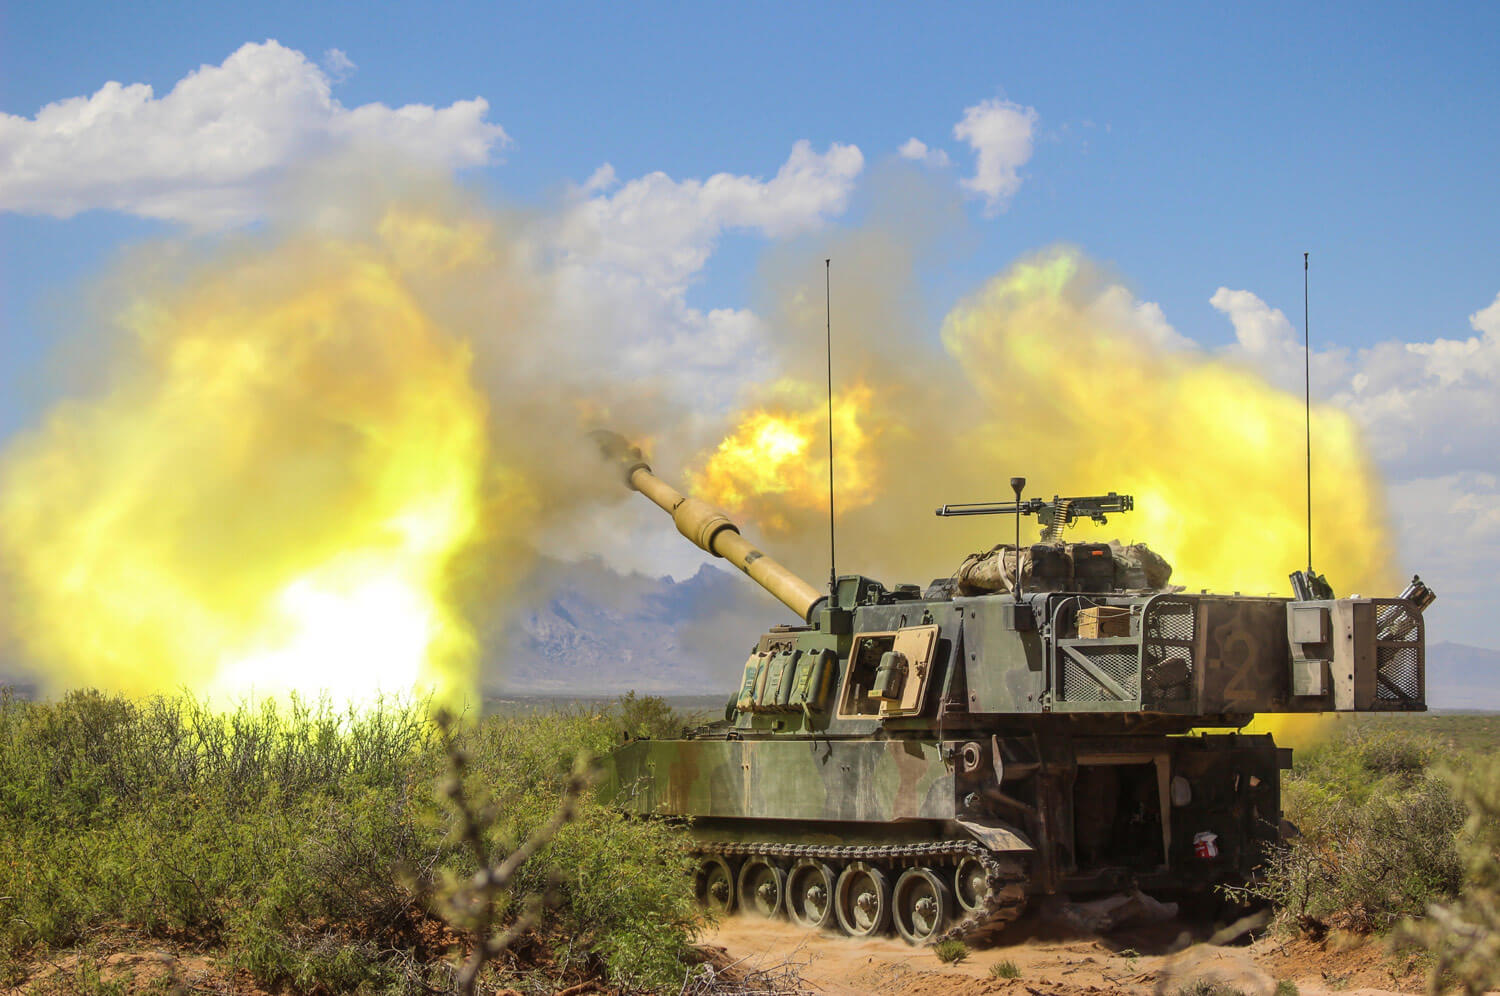 Soldiers of Battery B, 2d Battalion 114th Field Artillery Regiment, Mississippi Army National Guard, hone their gunnery skills as they conduct a table XVIII qualification near Dona Ana Range Camp in New Mexico, April 28, 2018. Table XVIII qualifications consist of an entire battalion conducting fire missions together for validation. Mississippi Army National Guard photo by SGT Brittany Johnson